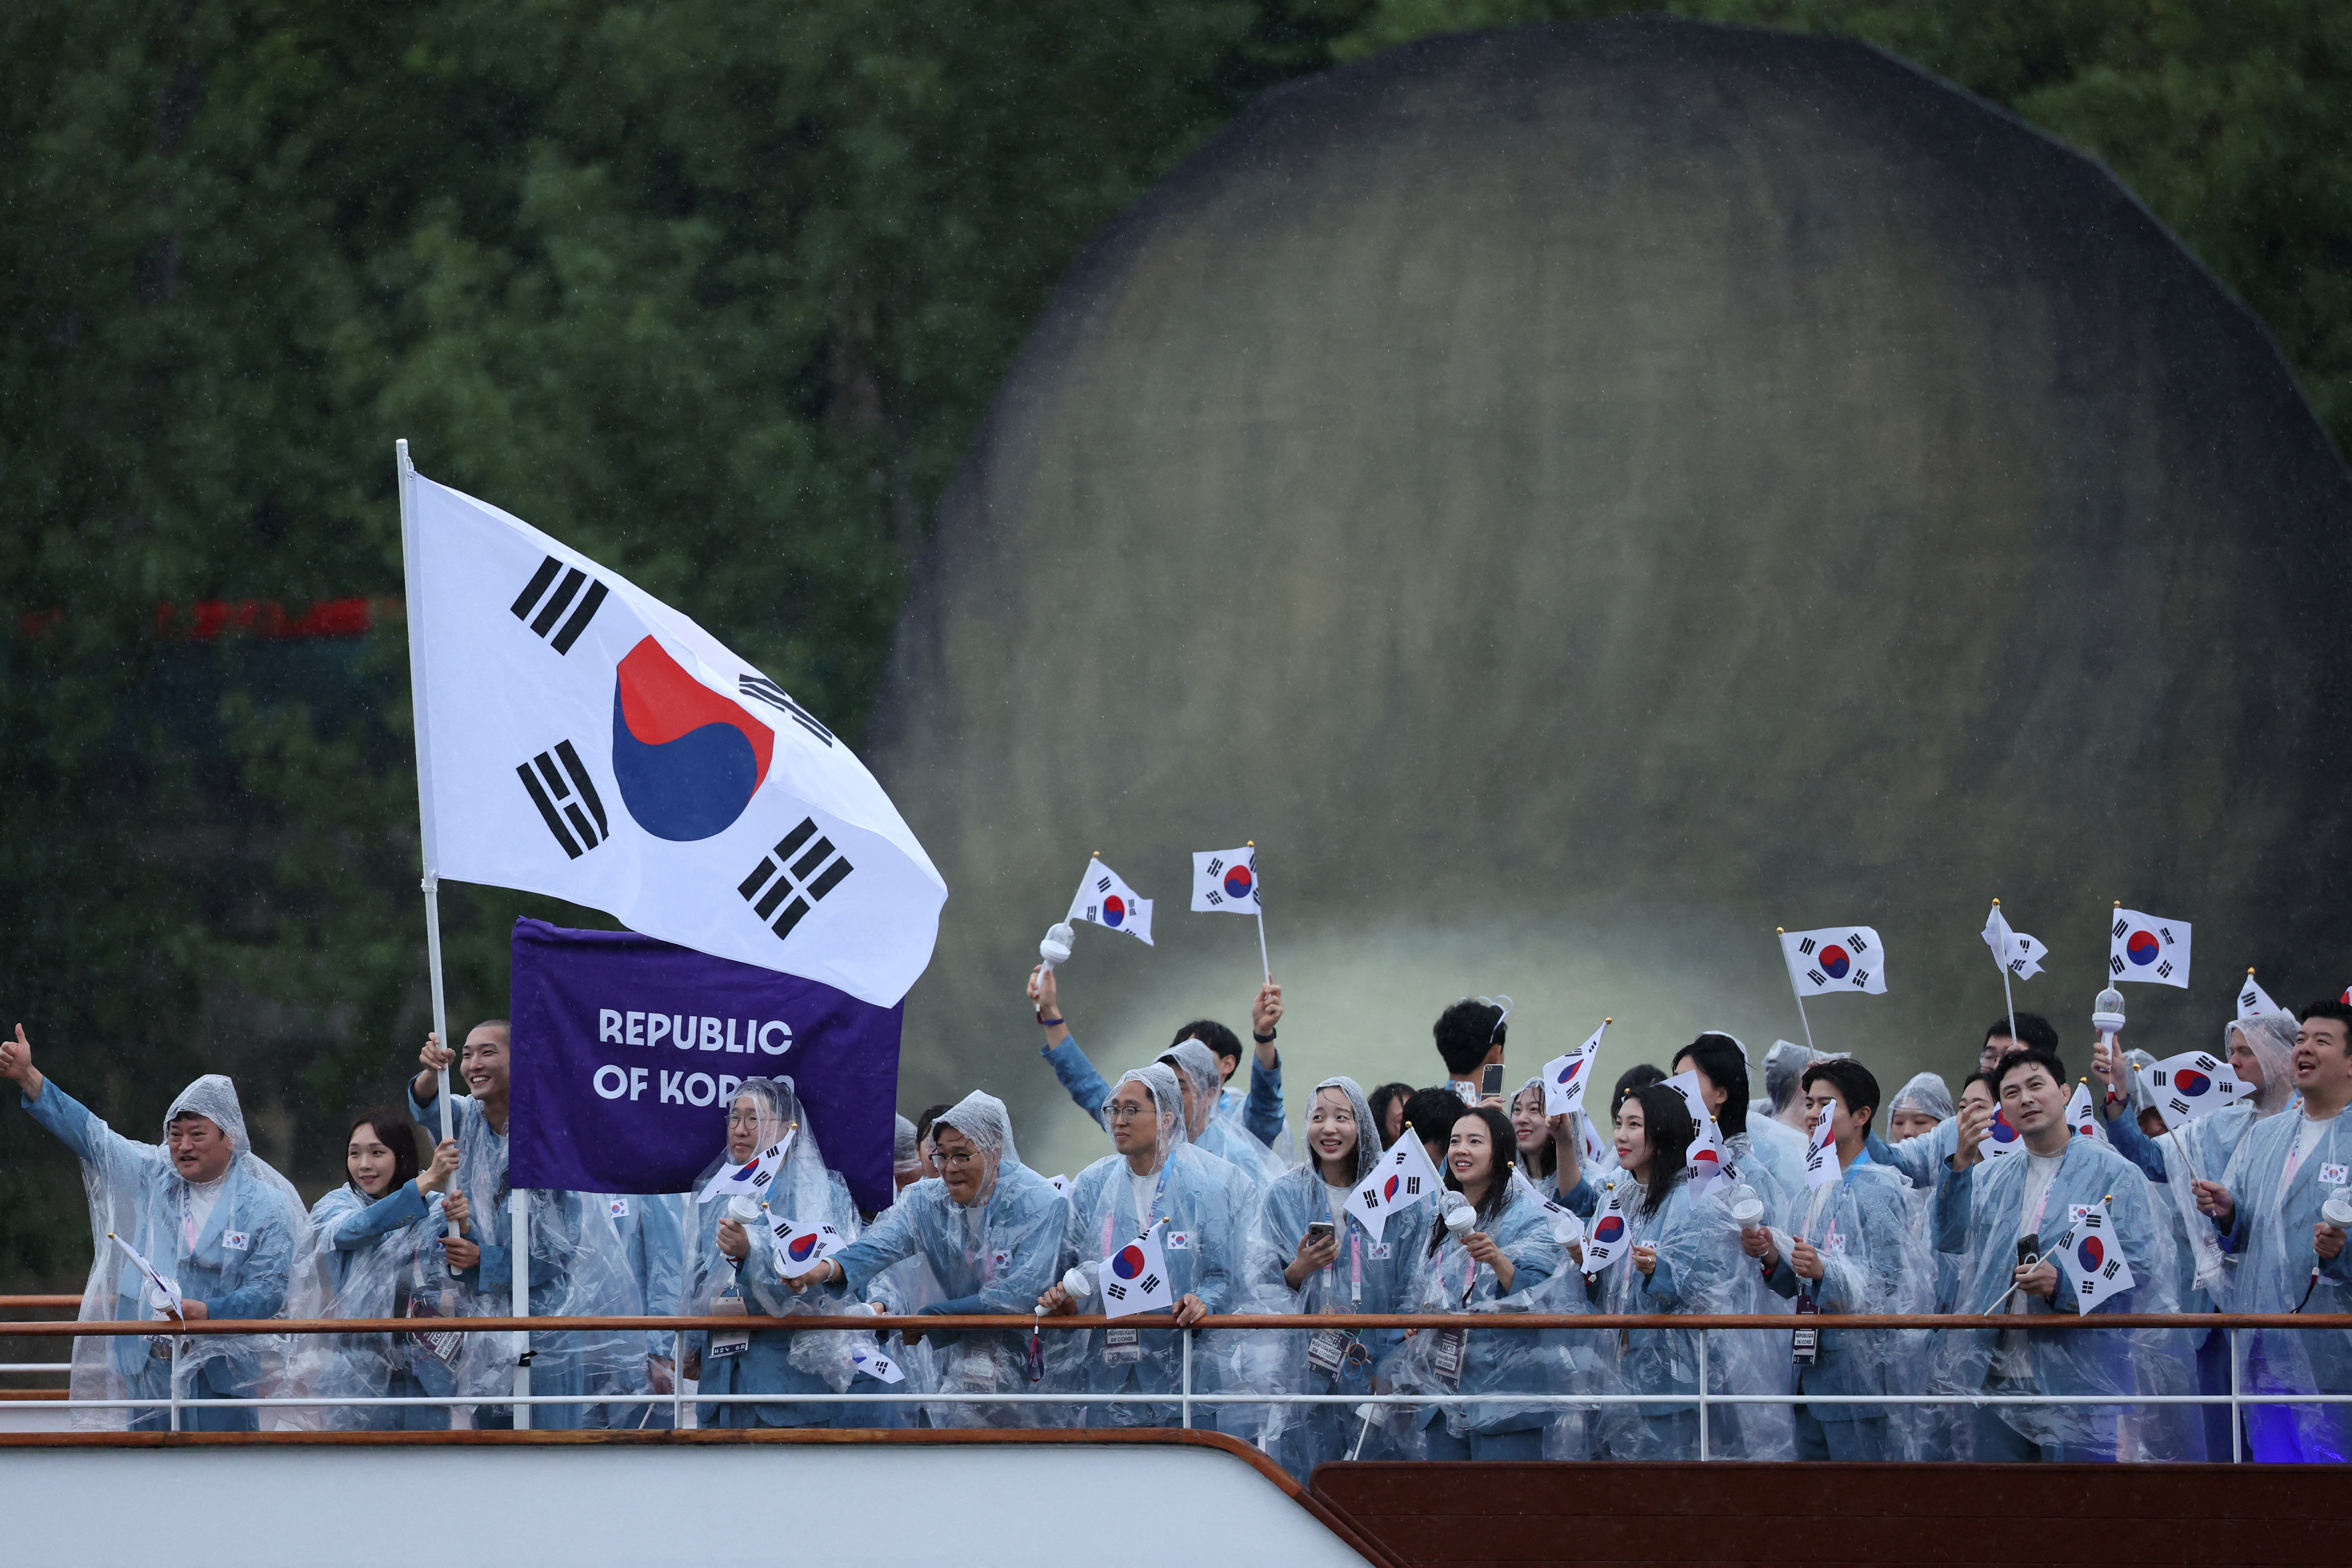 S. Korea expresses regret after its athletes introduced as N. Korea at opening ceremony